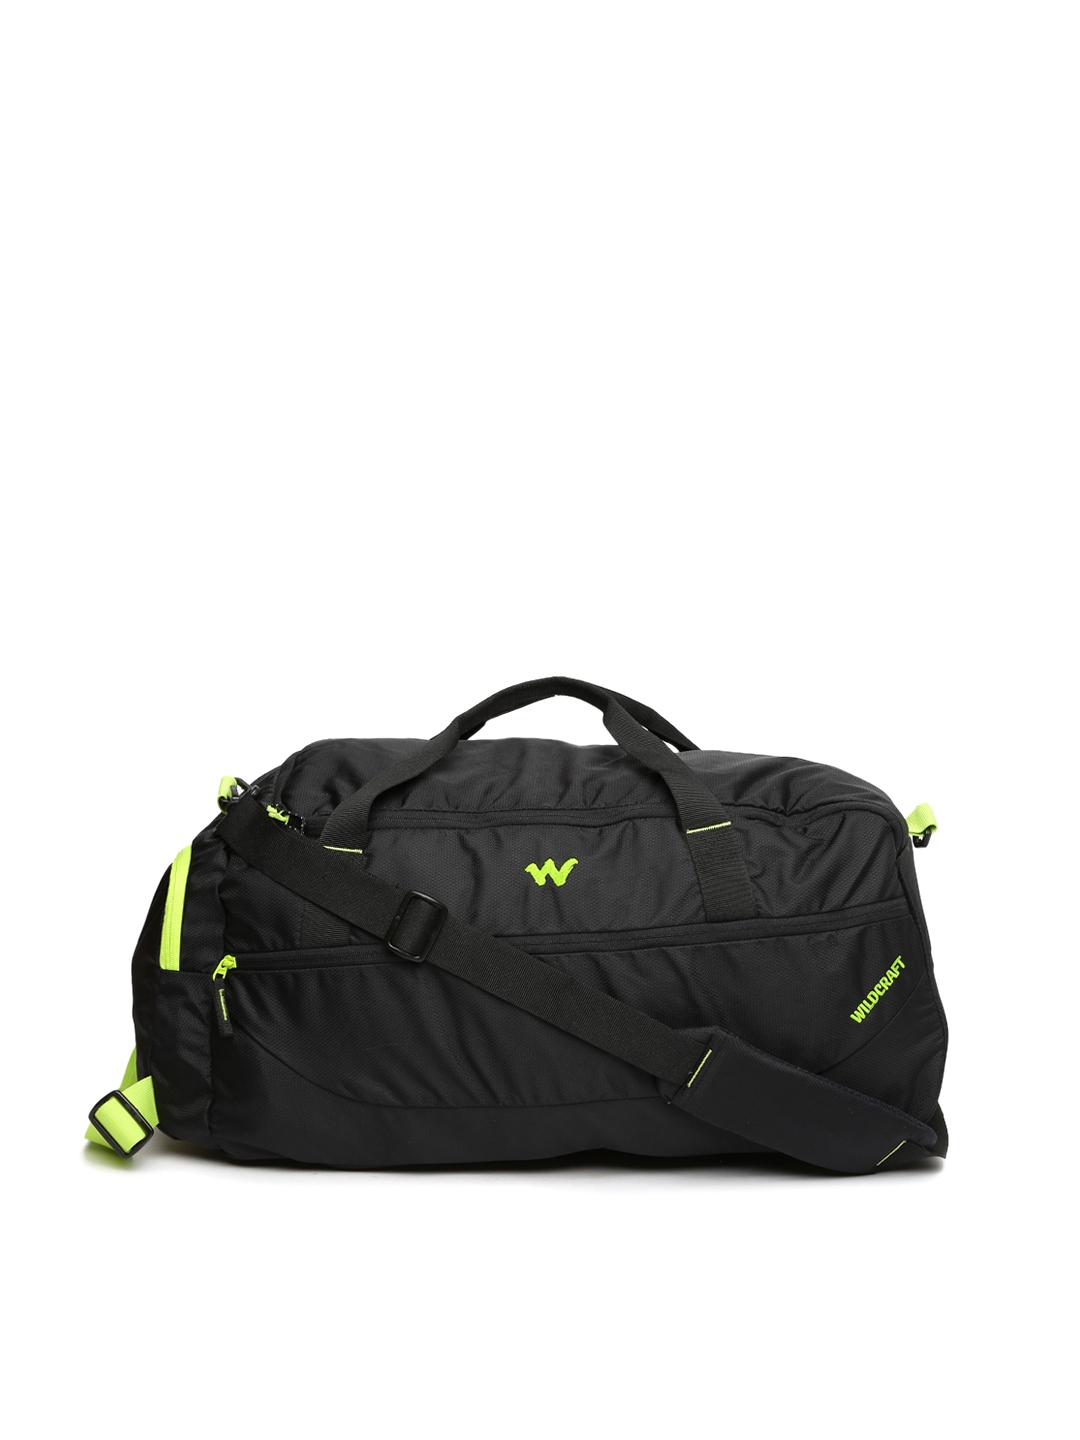 Discover more than 82 wildcraft duffle trolley bag super hot - in ...